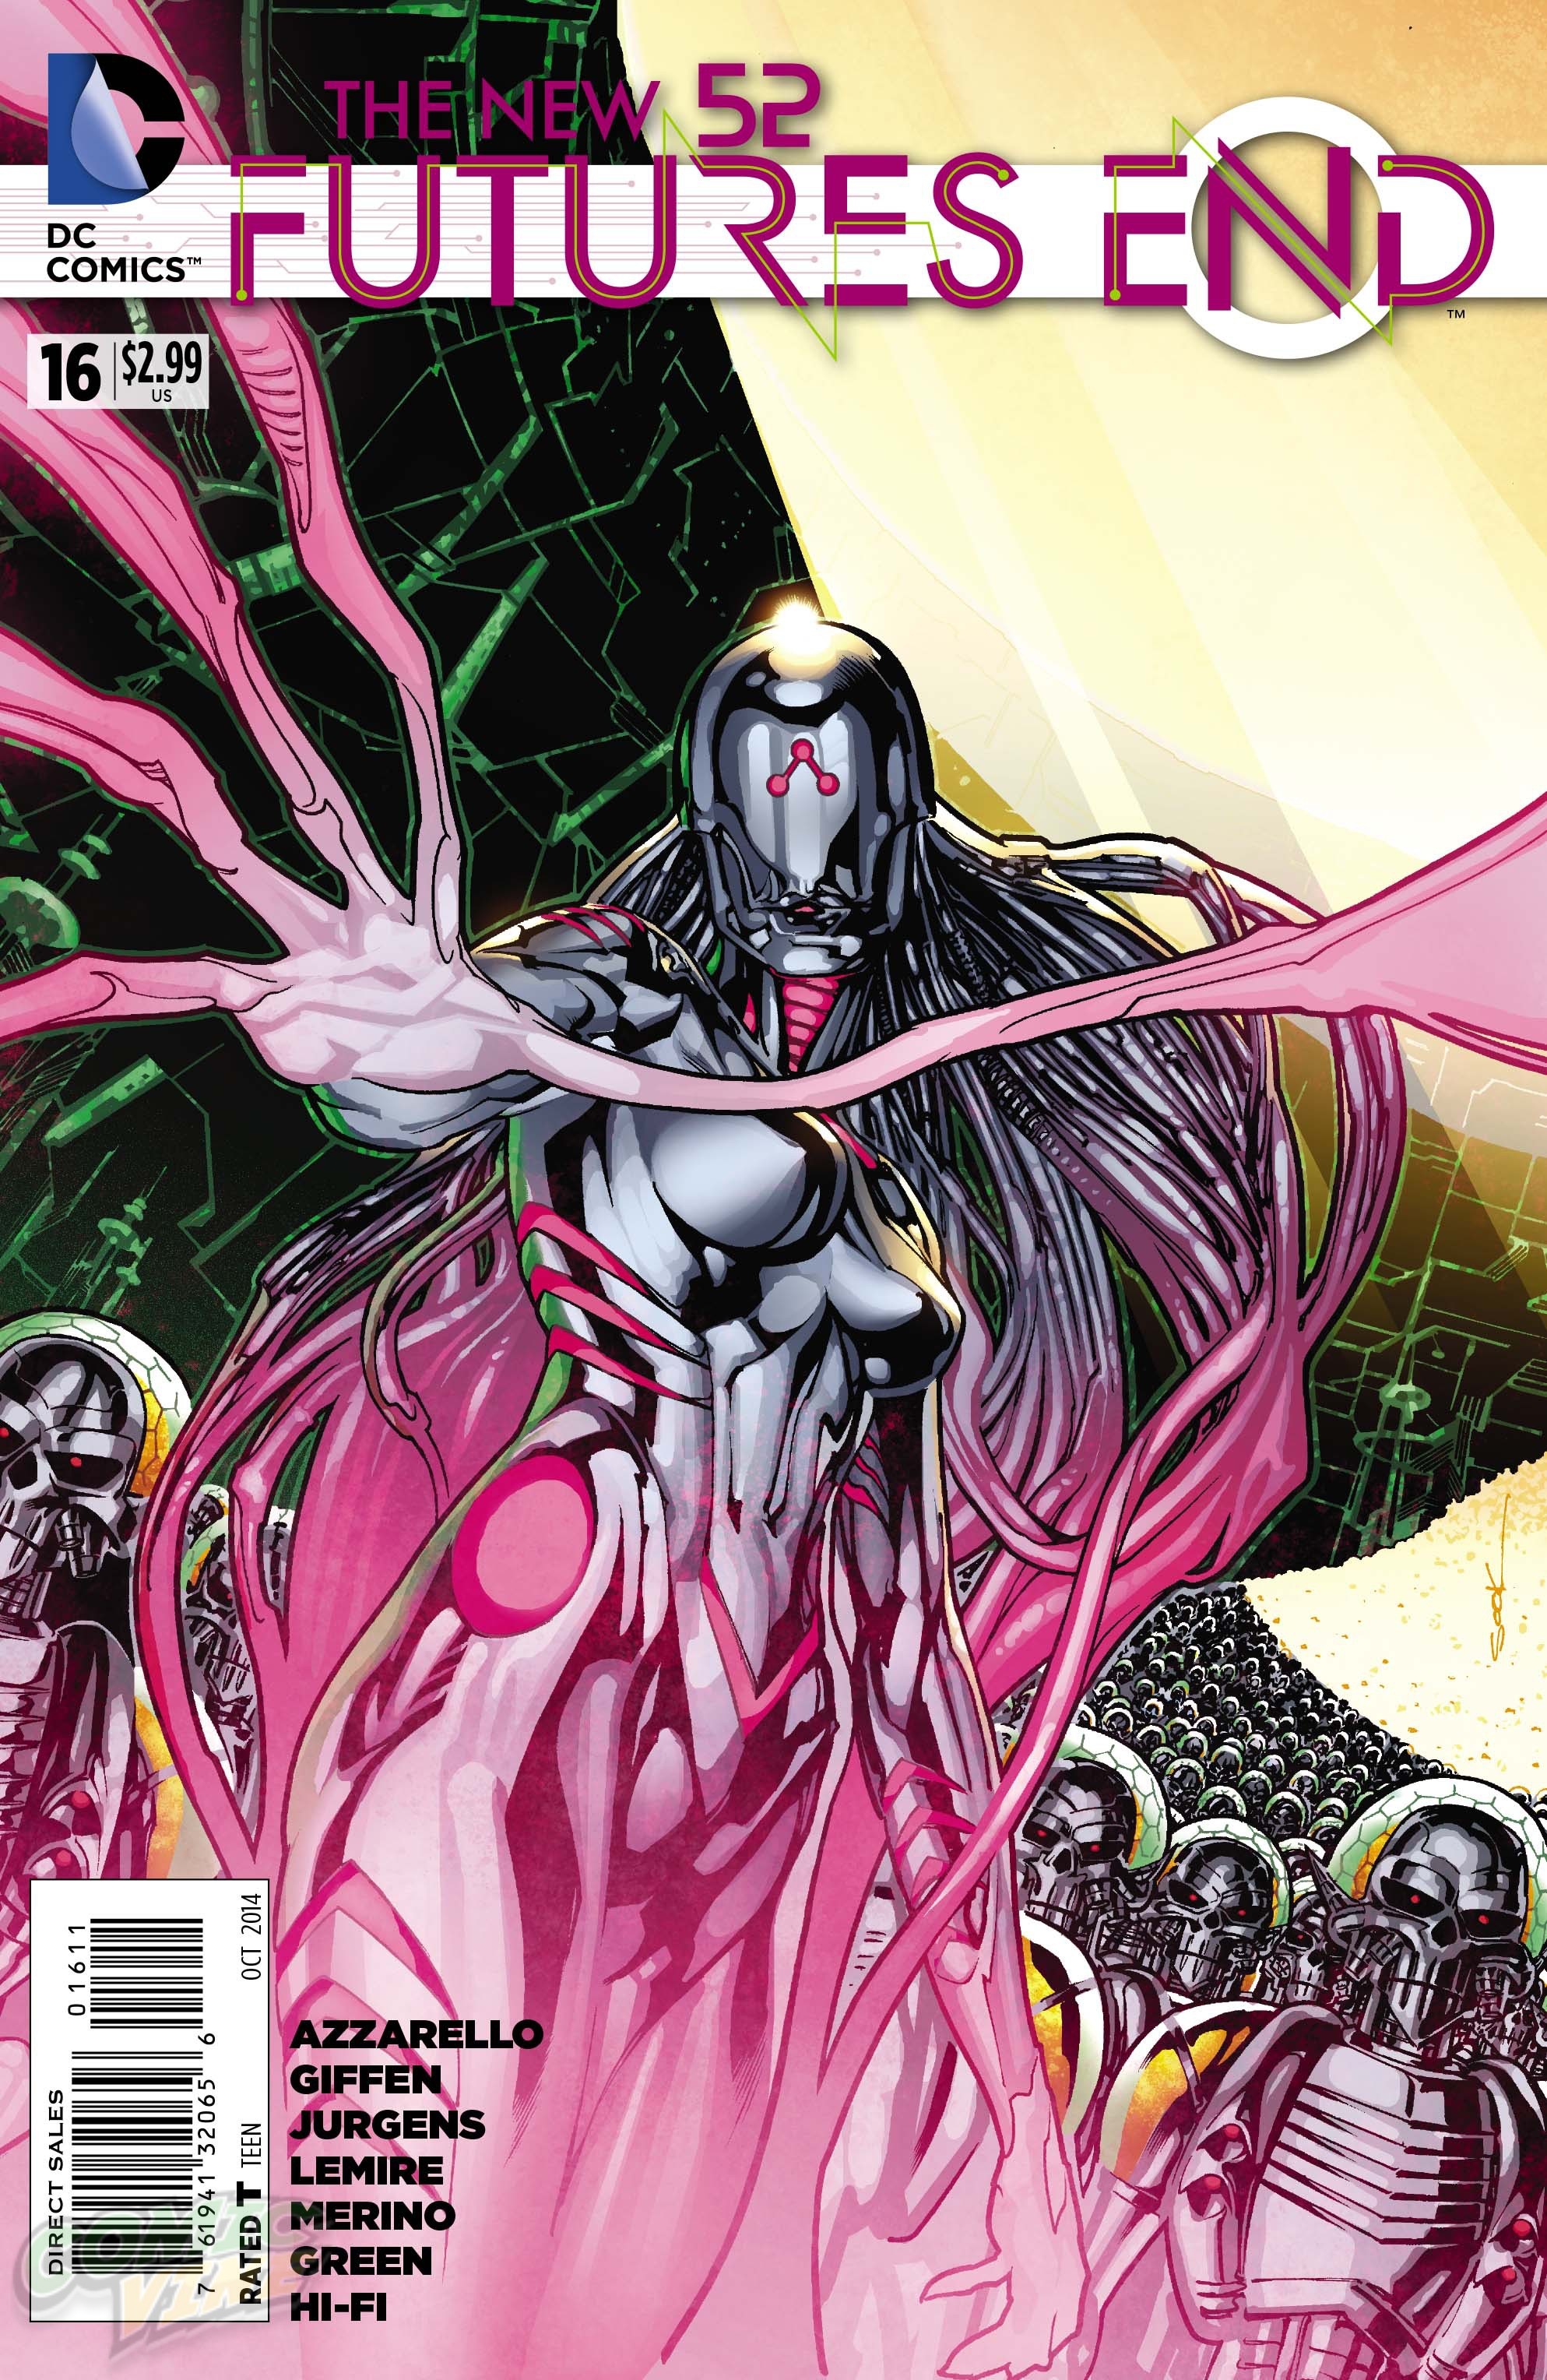 The New 52: Futures End Vol. 1 #16